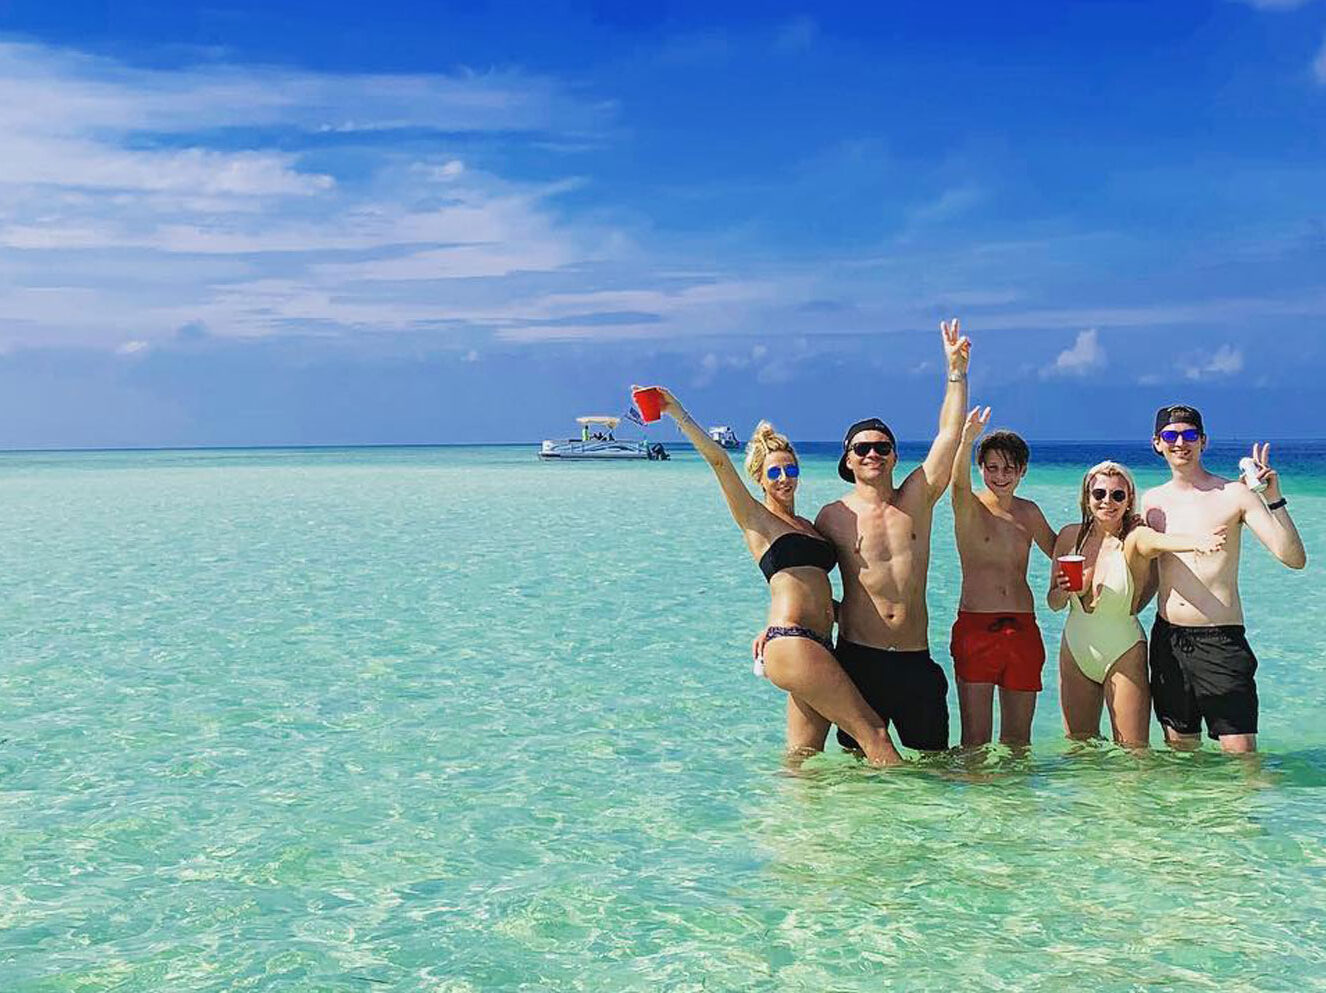 A group of friends enjoying a day at the sandbar in Florida during their vacation. They are on a sandbar charter, relaxing and socializing in the beautiful coastal setting.